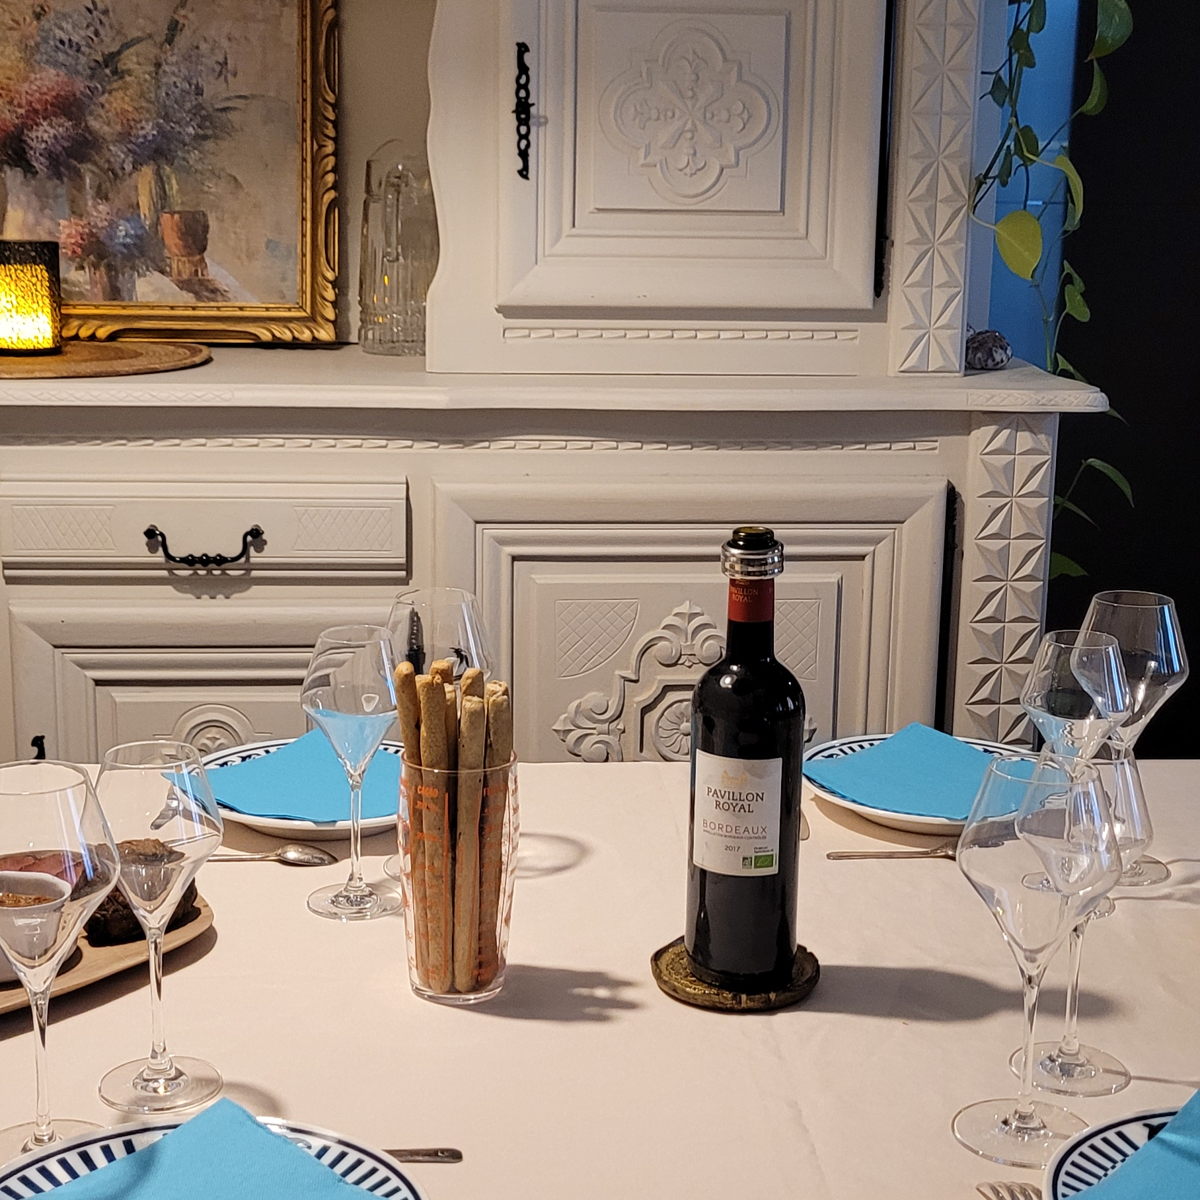 French dinner with a Mediterranean touch in the heart of Nice